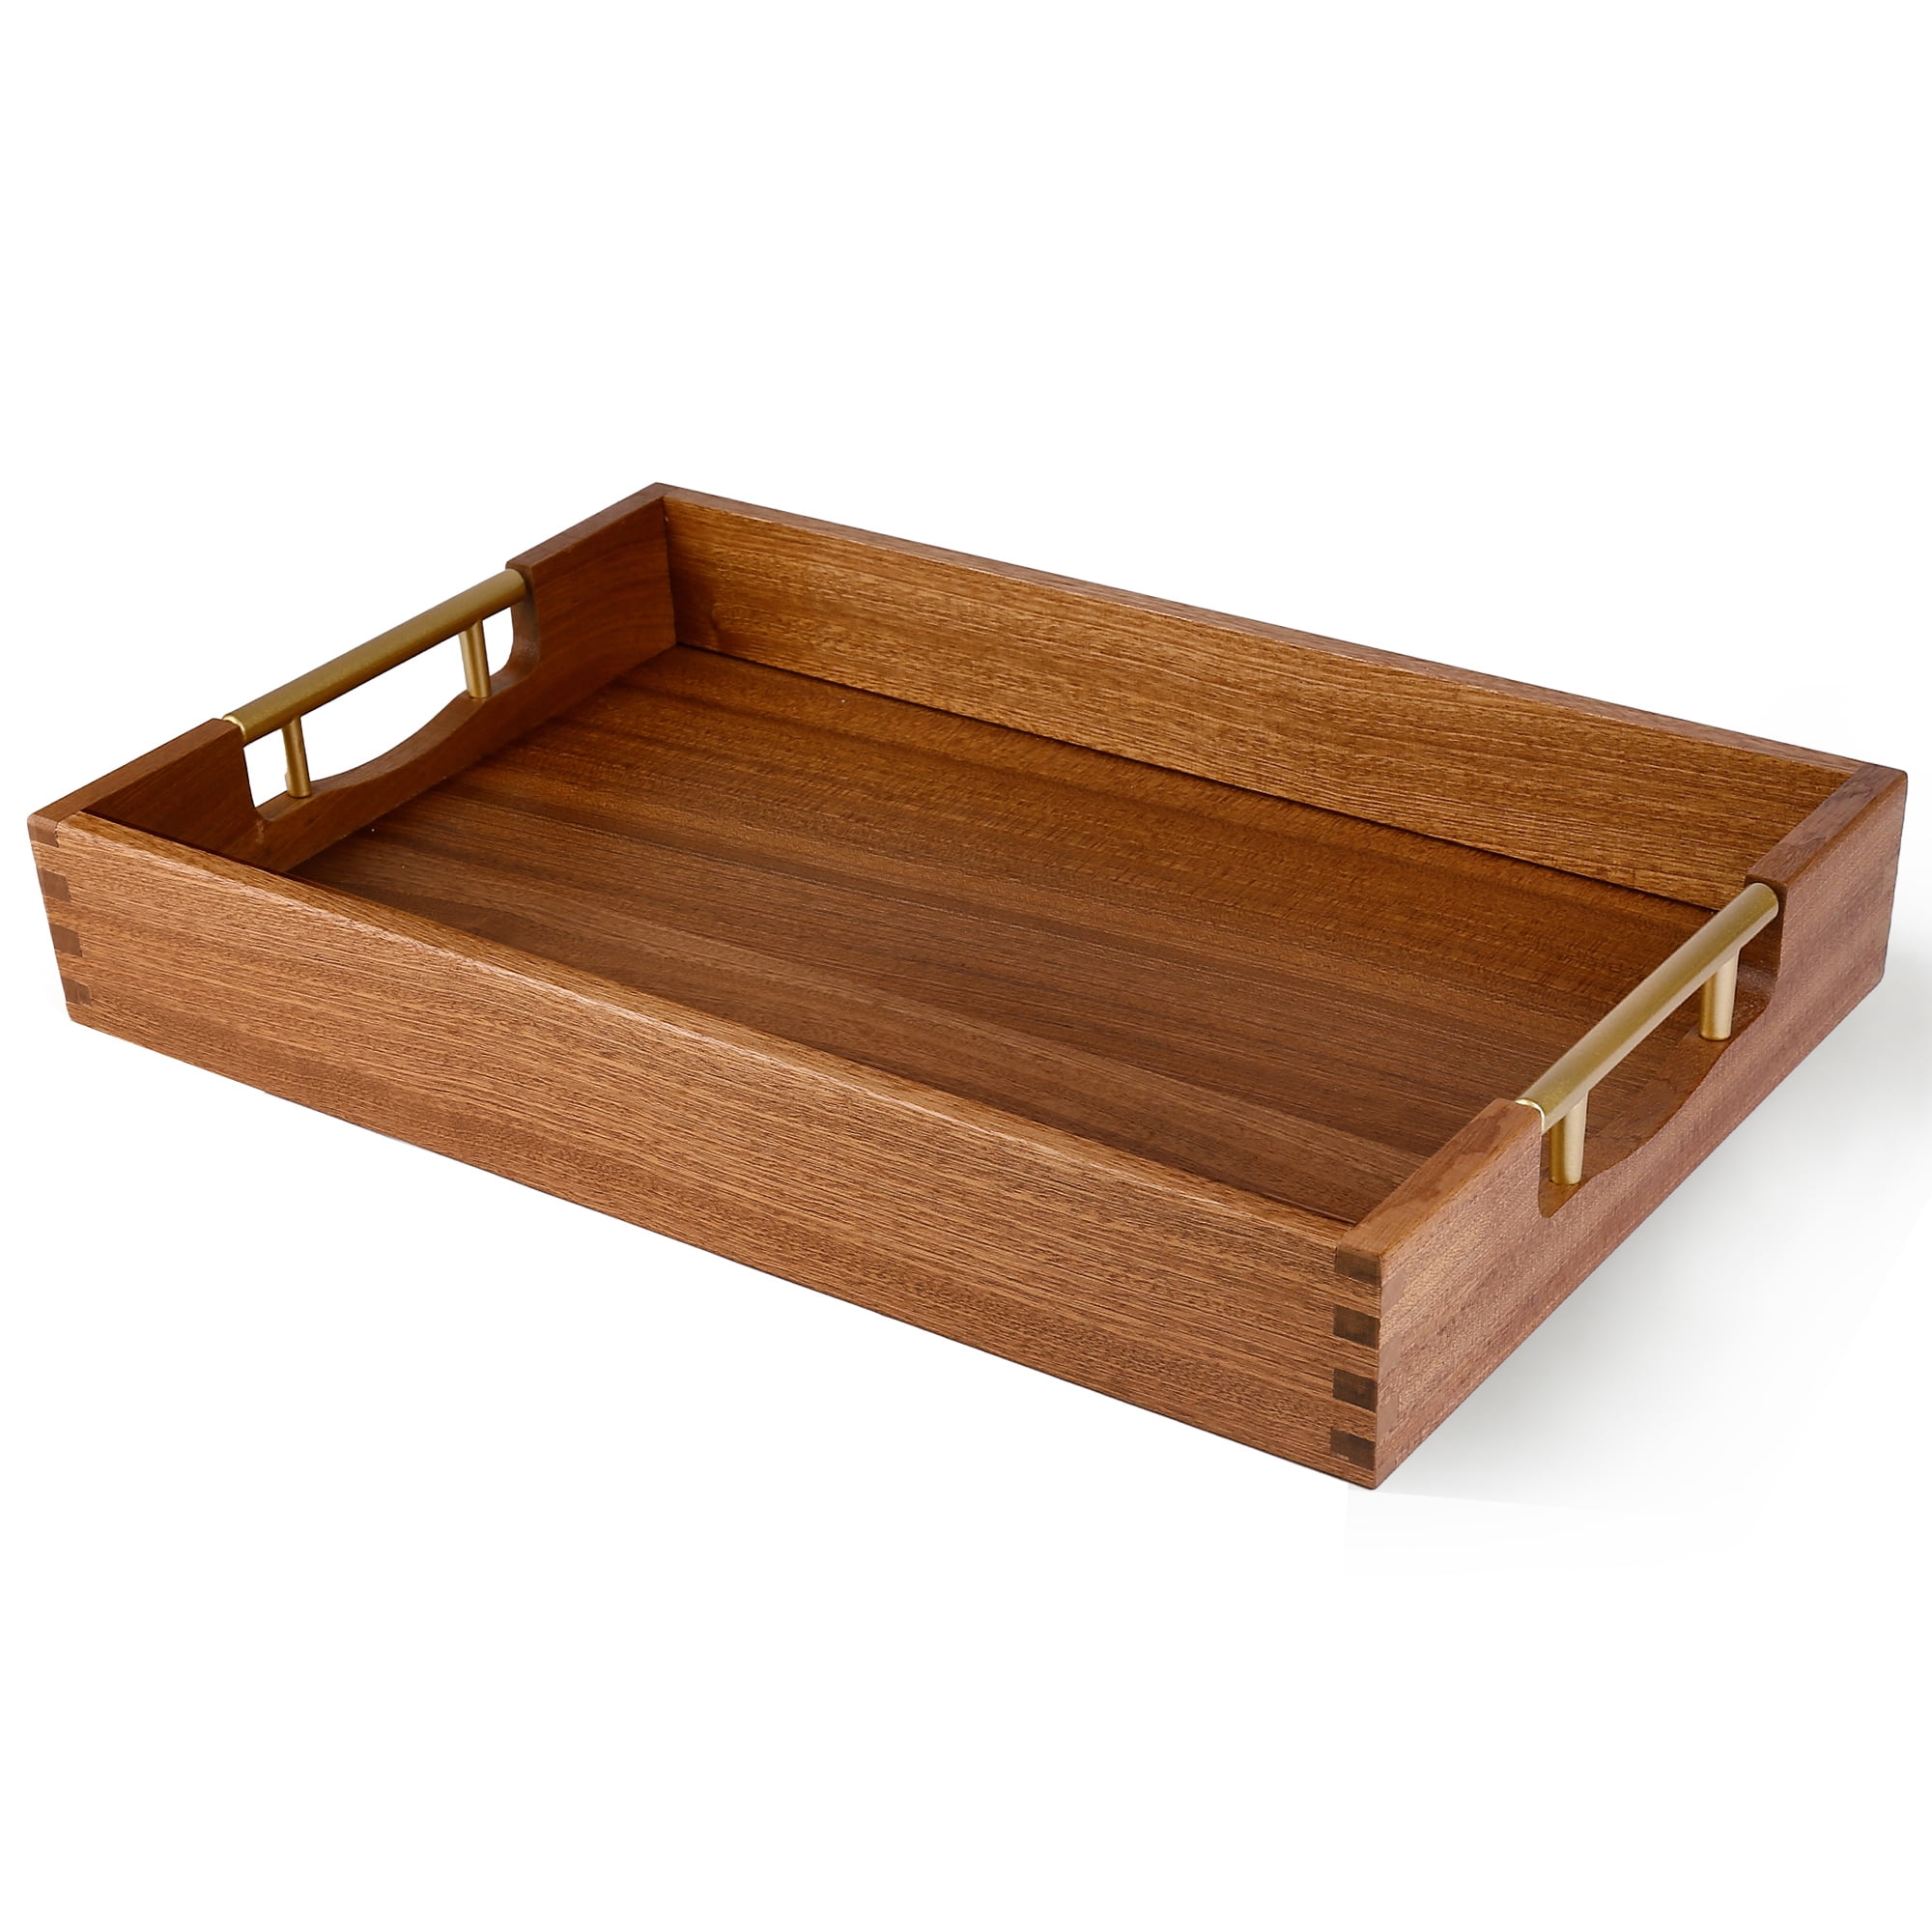 Wood Serving Tray with Handles - 17 Inch Premium Rustic Tray for